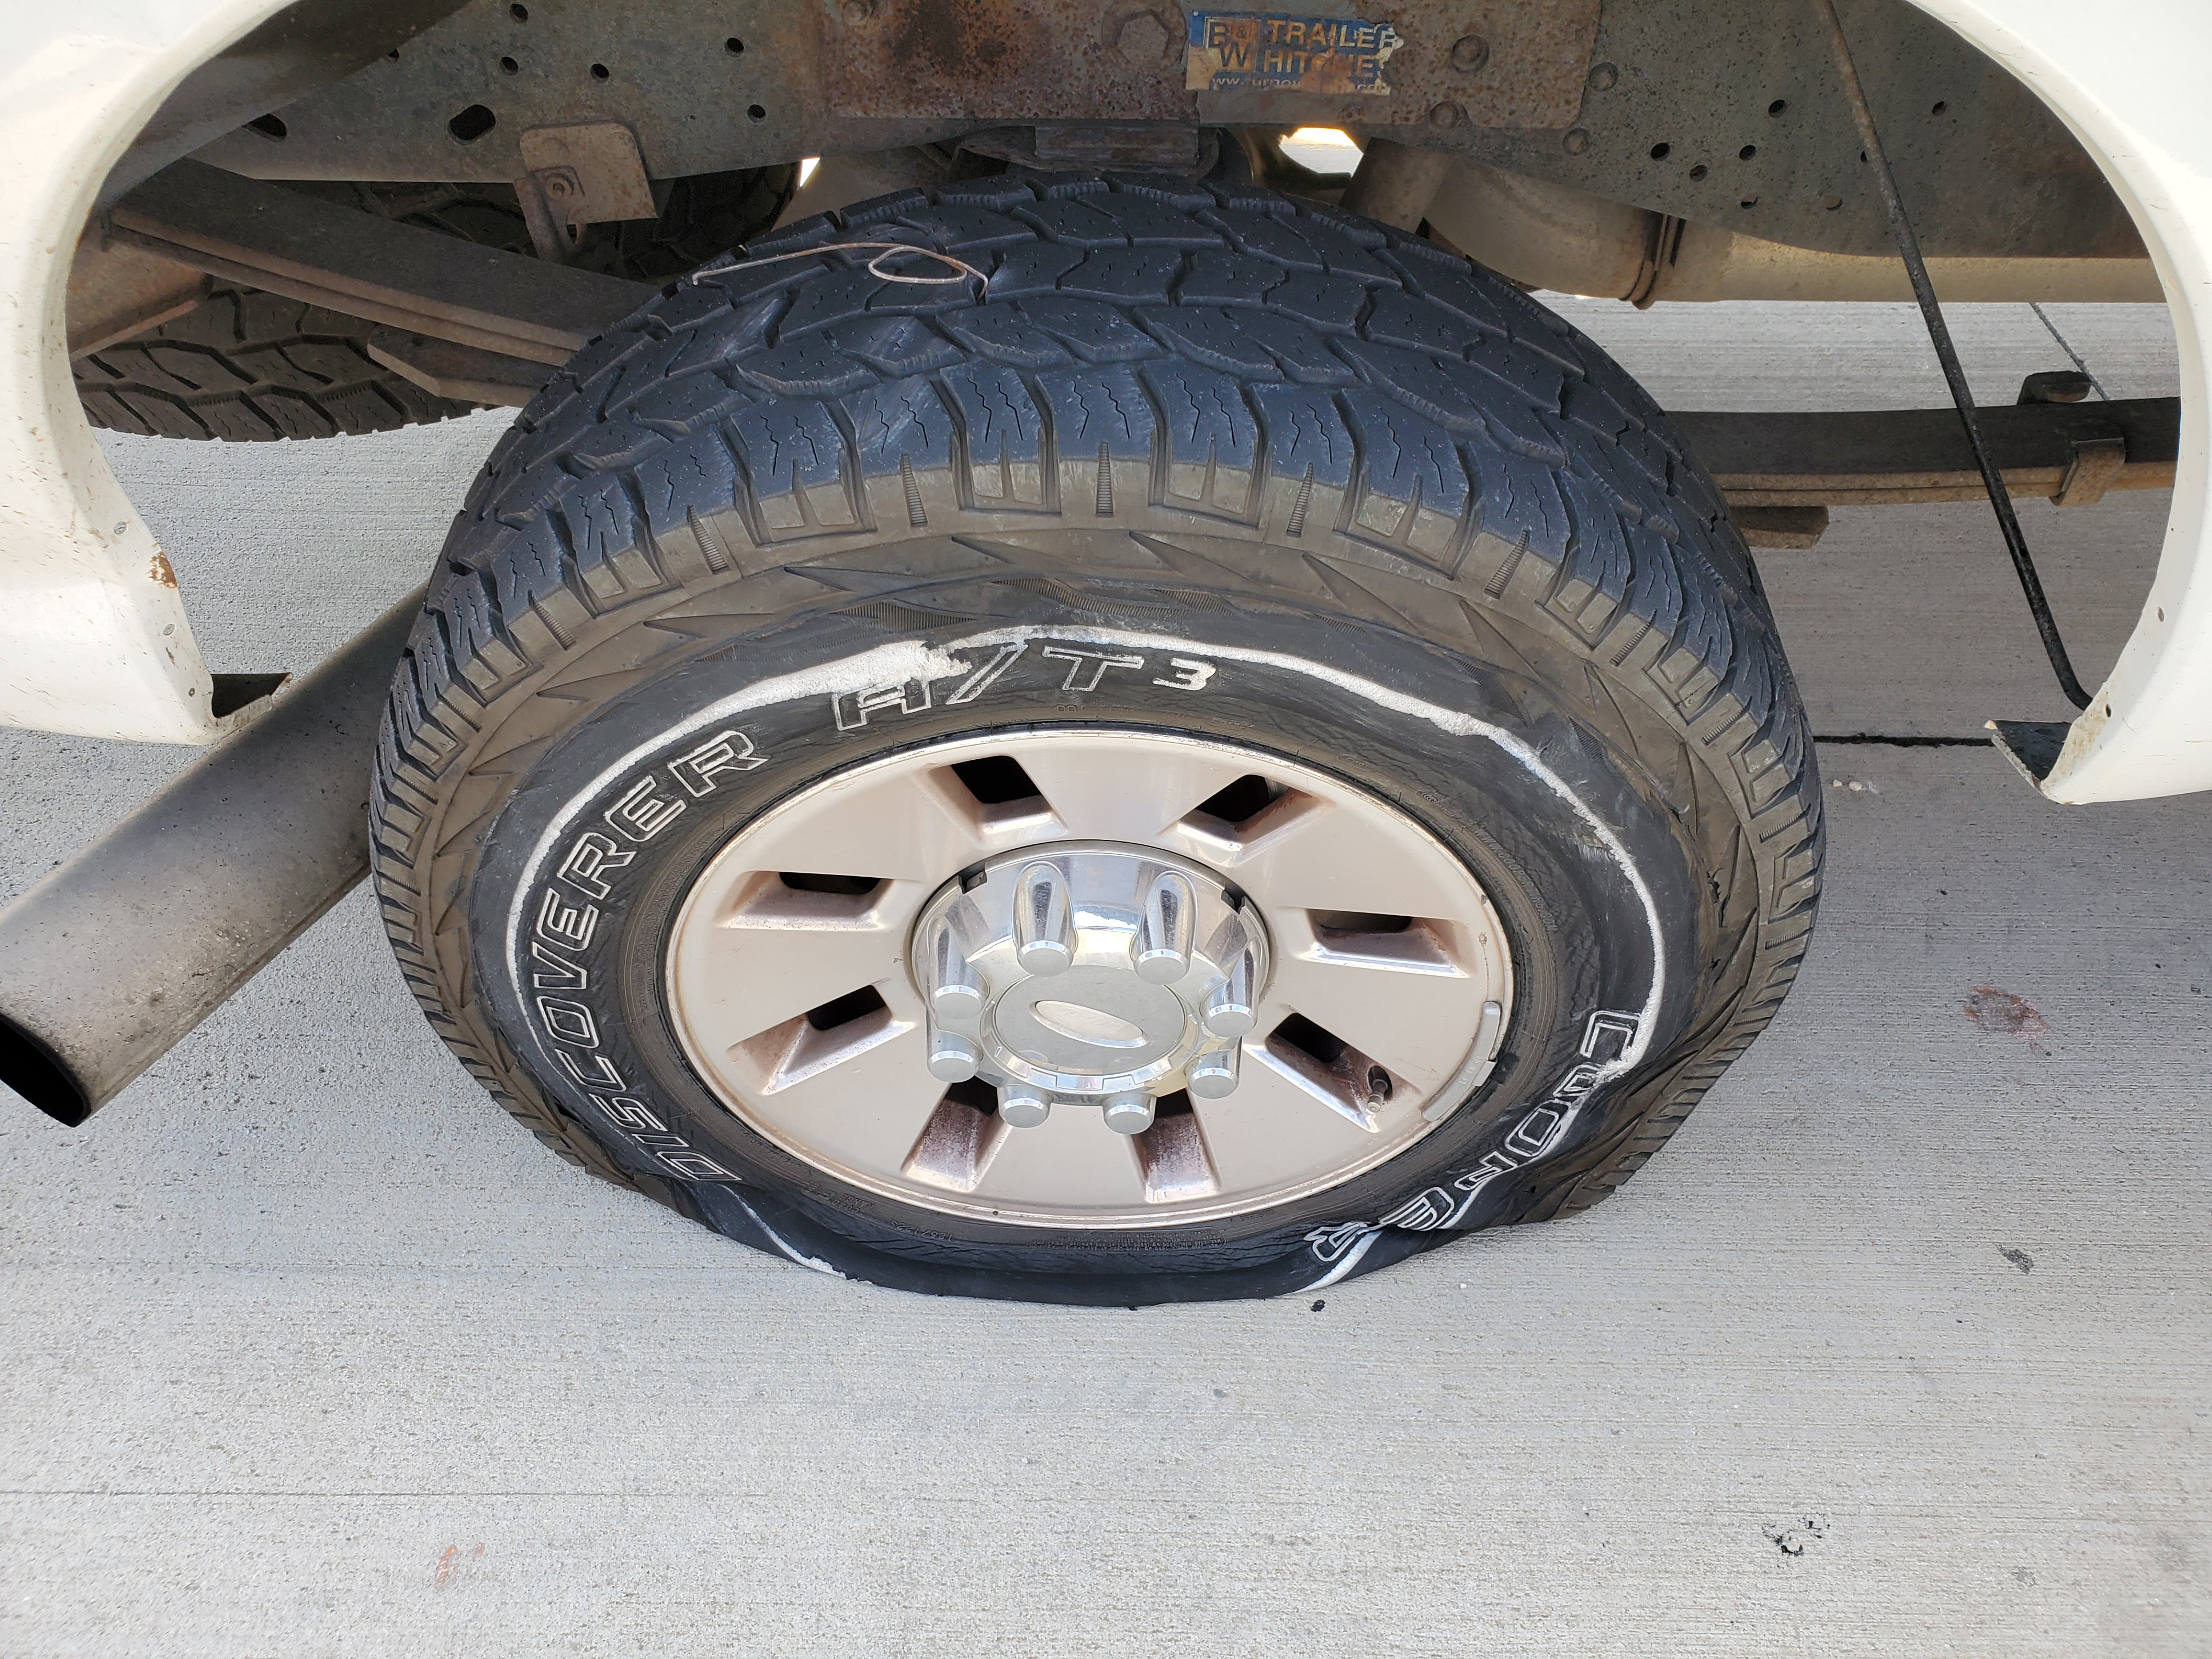 A flat tire on our F-250 pickup truck with a wire sticking out of the tire